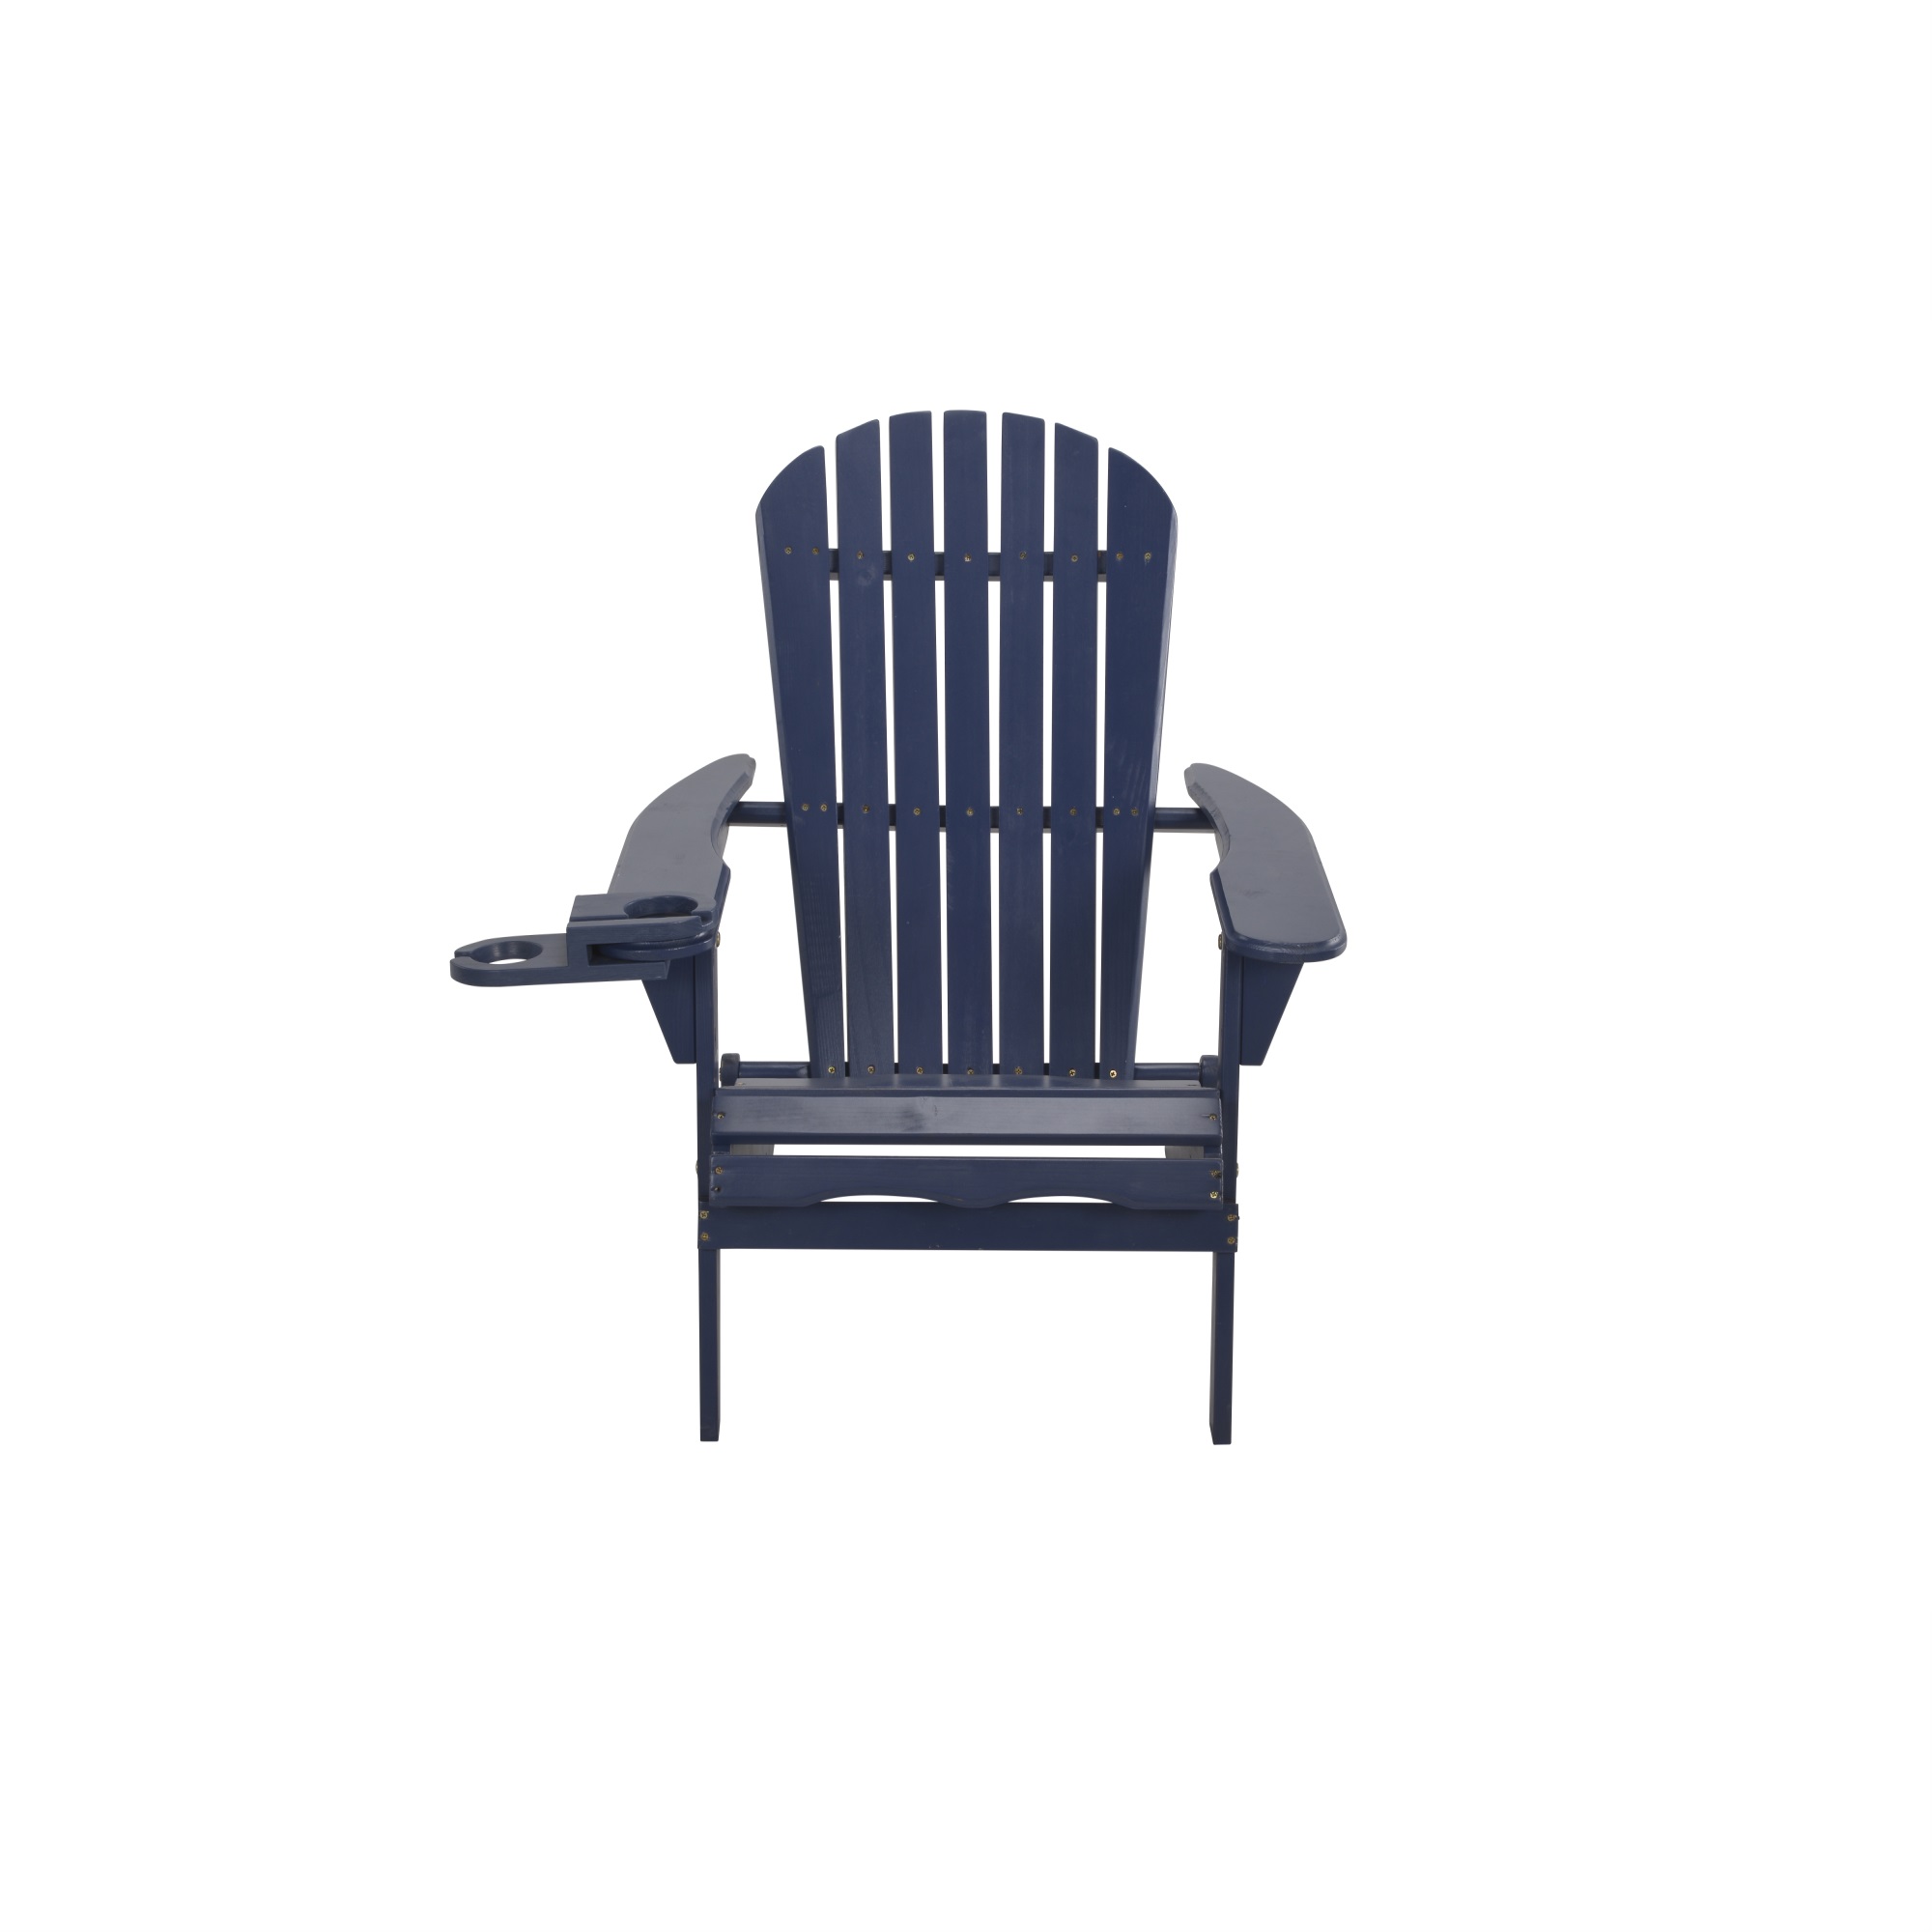 W Unlimited Foldable Adirondack Chair with cup holder set of 4